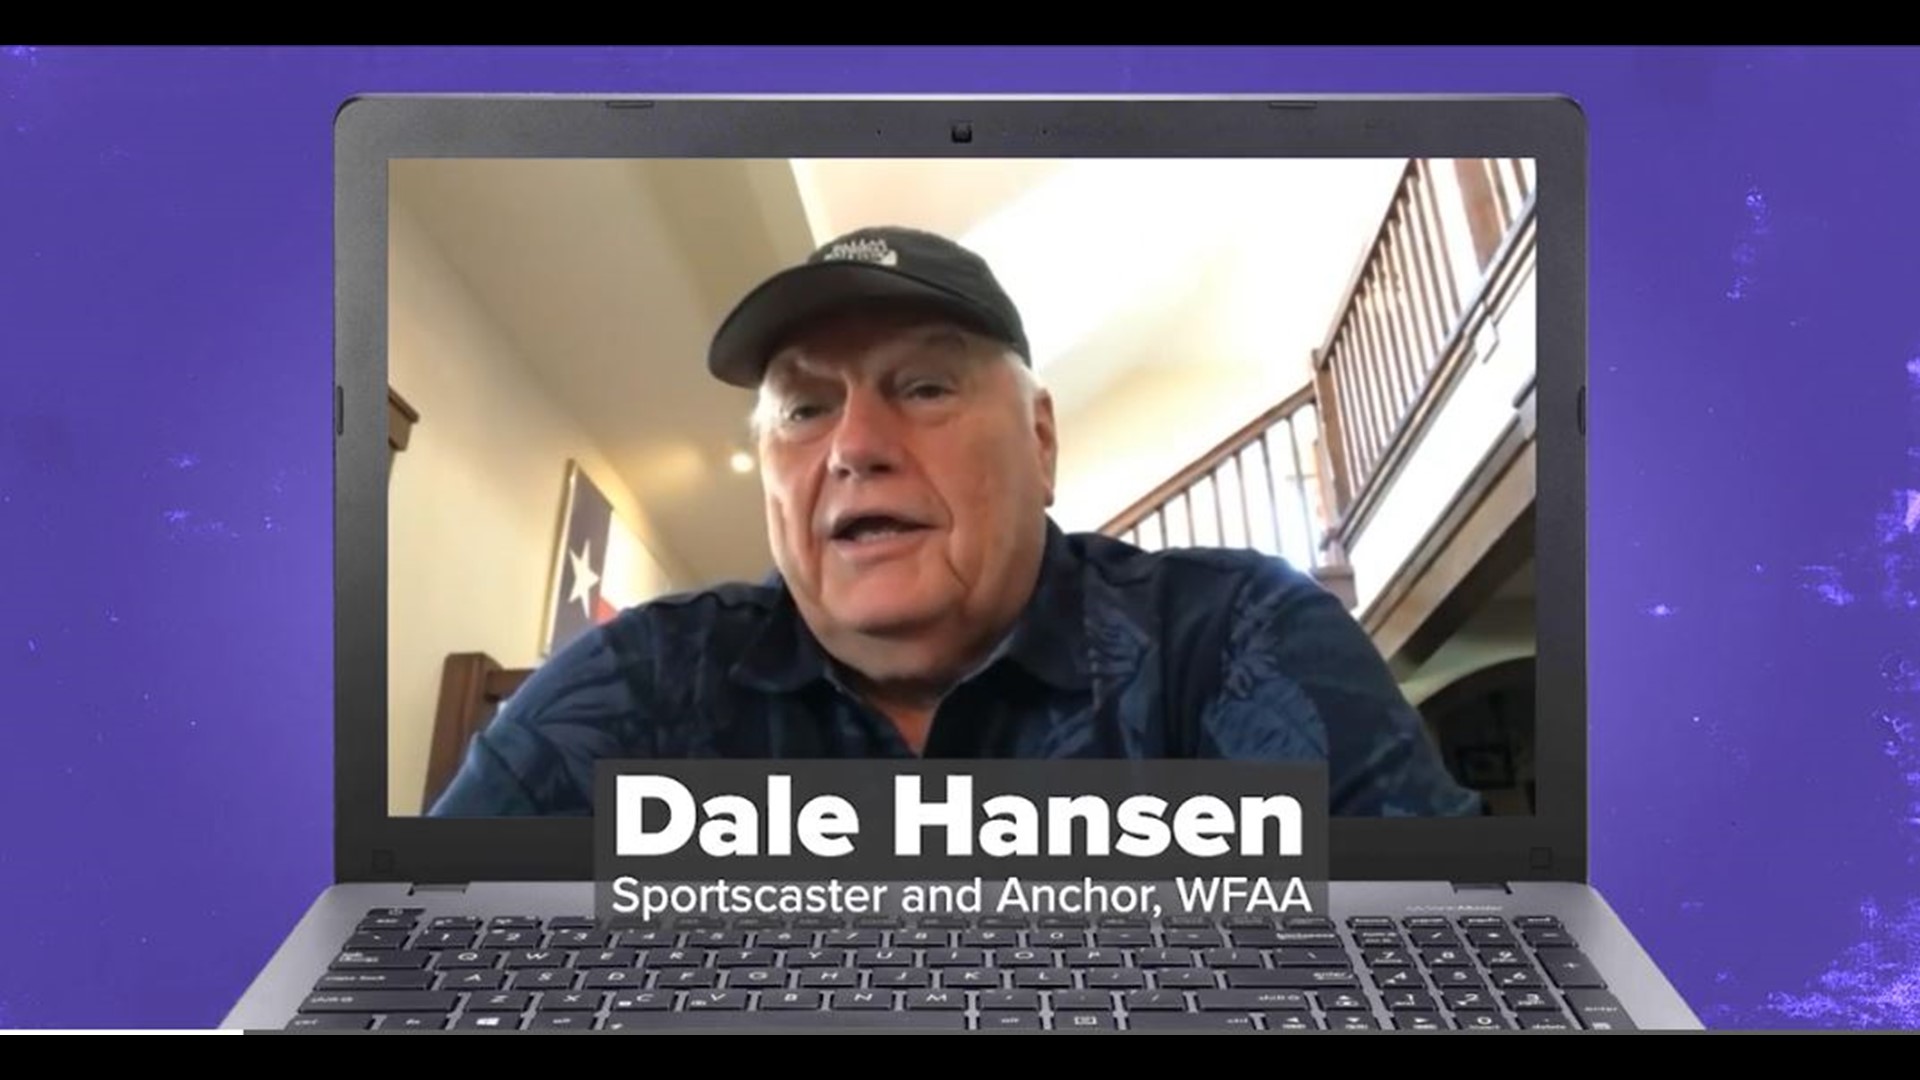 Sportscaster Dale Hansen, who has covered college football for more than 40 years, gives his take on canceling football during the pandemic.